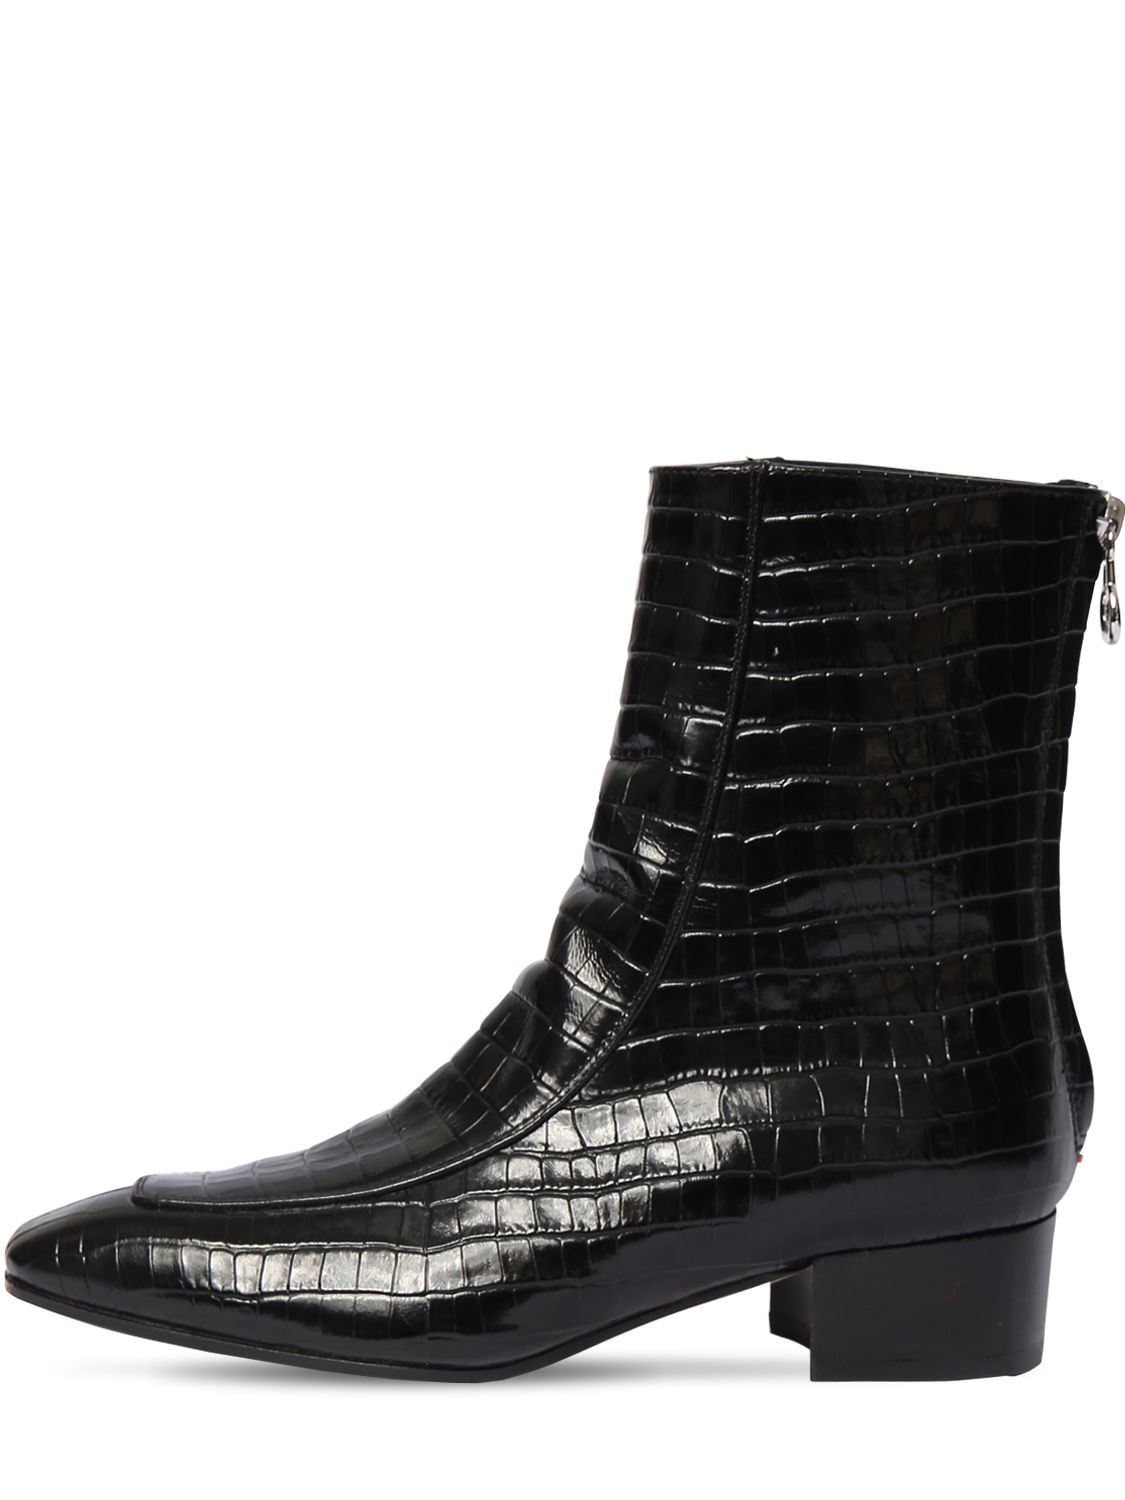 AEYDE 35mm Amelia Croc Embossed Leather Boots